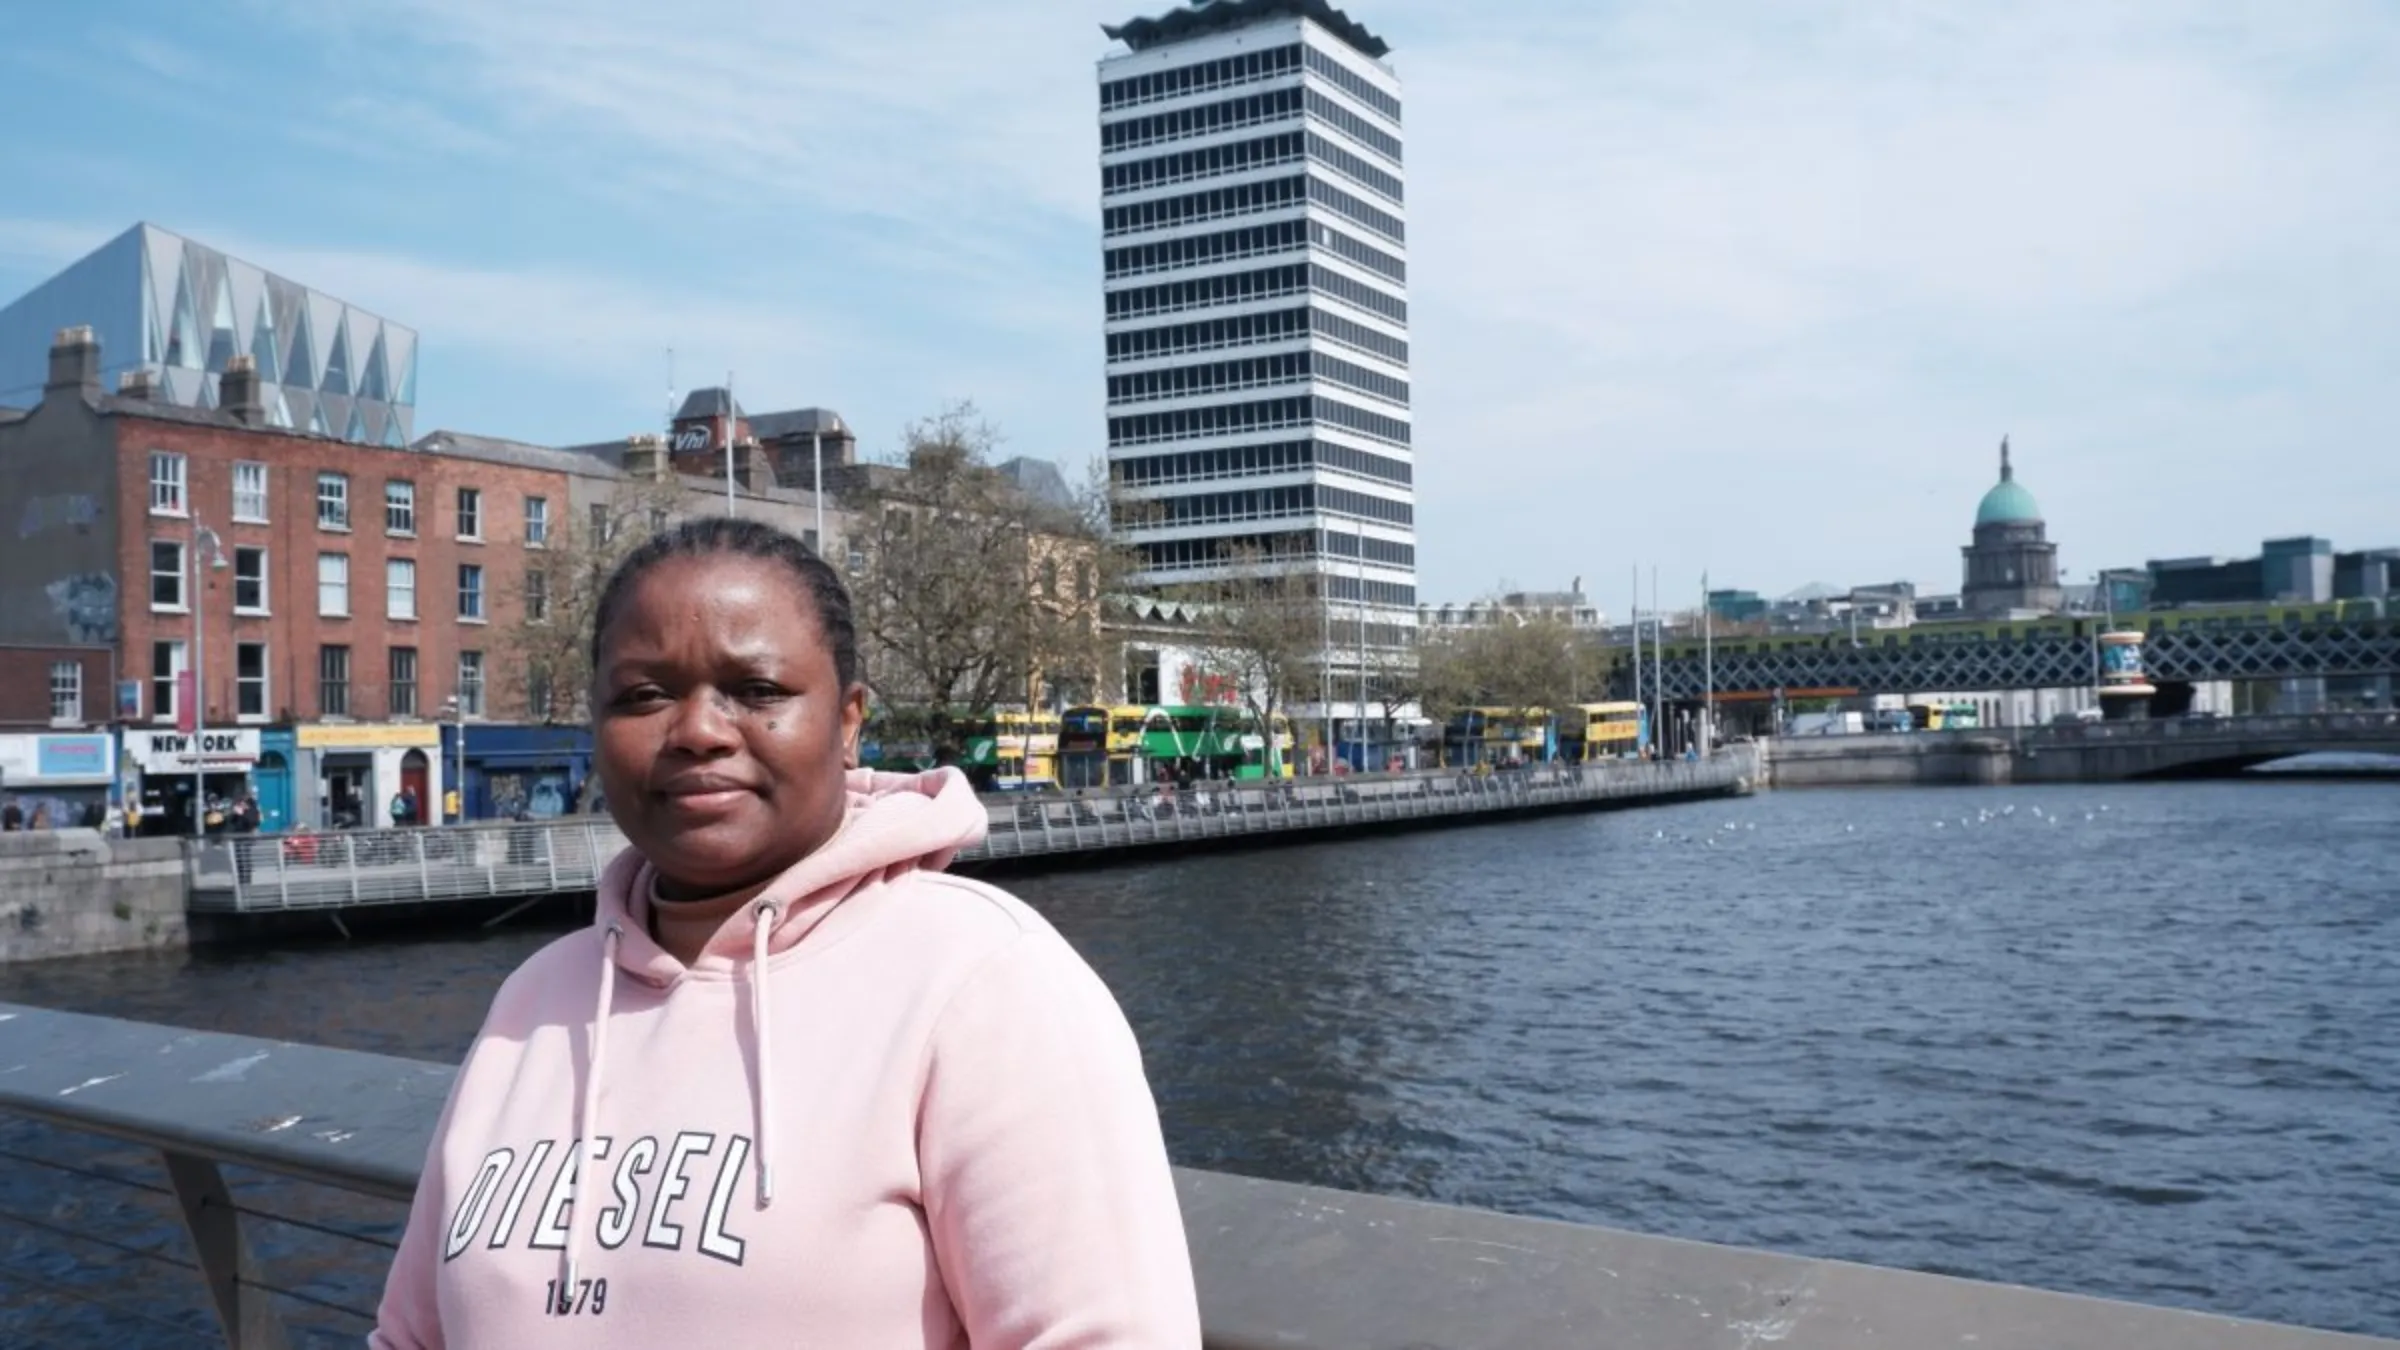 Sharon Mpofu, a refugee from Zimbabwe, poses for a portrait in the city centre in Dublin, Ireland, May 2023